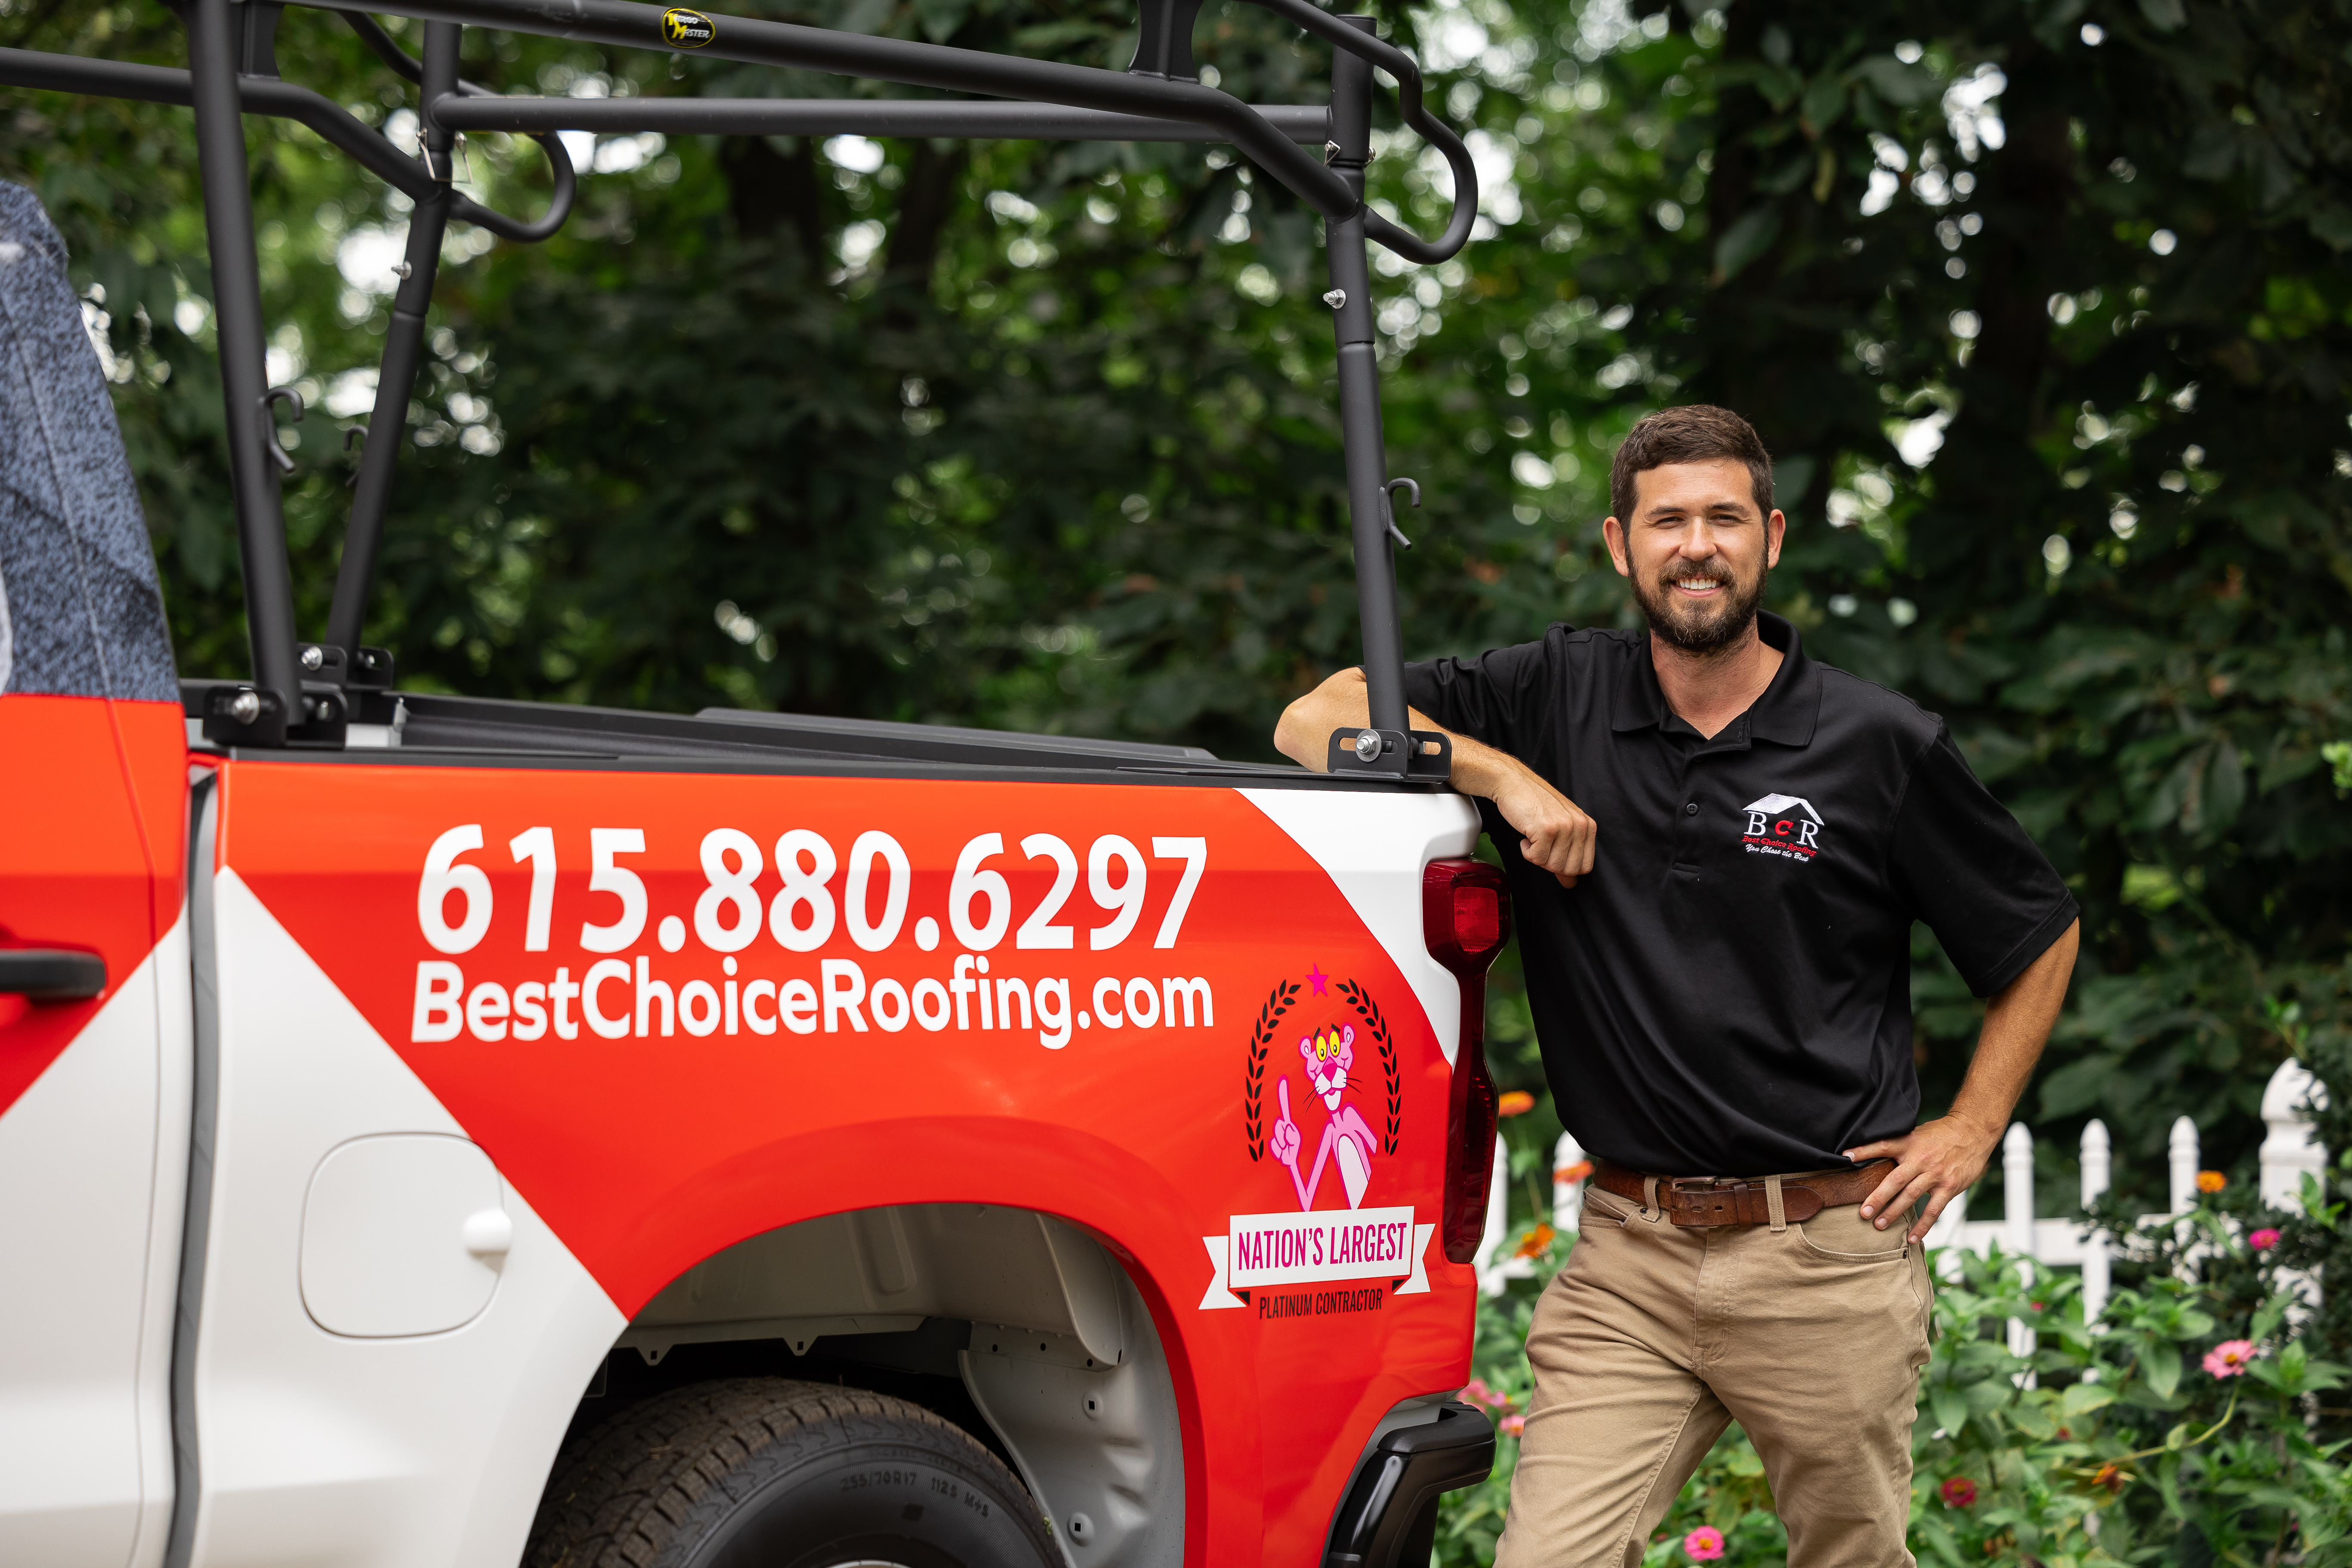 Best Choice Roofing - Reliable Roofing Contractors